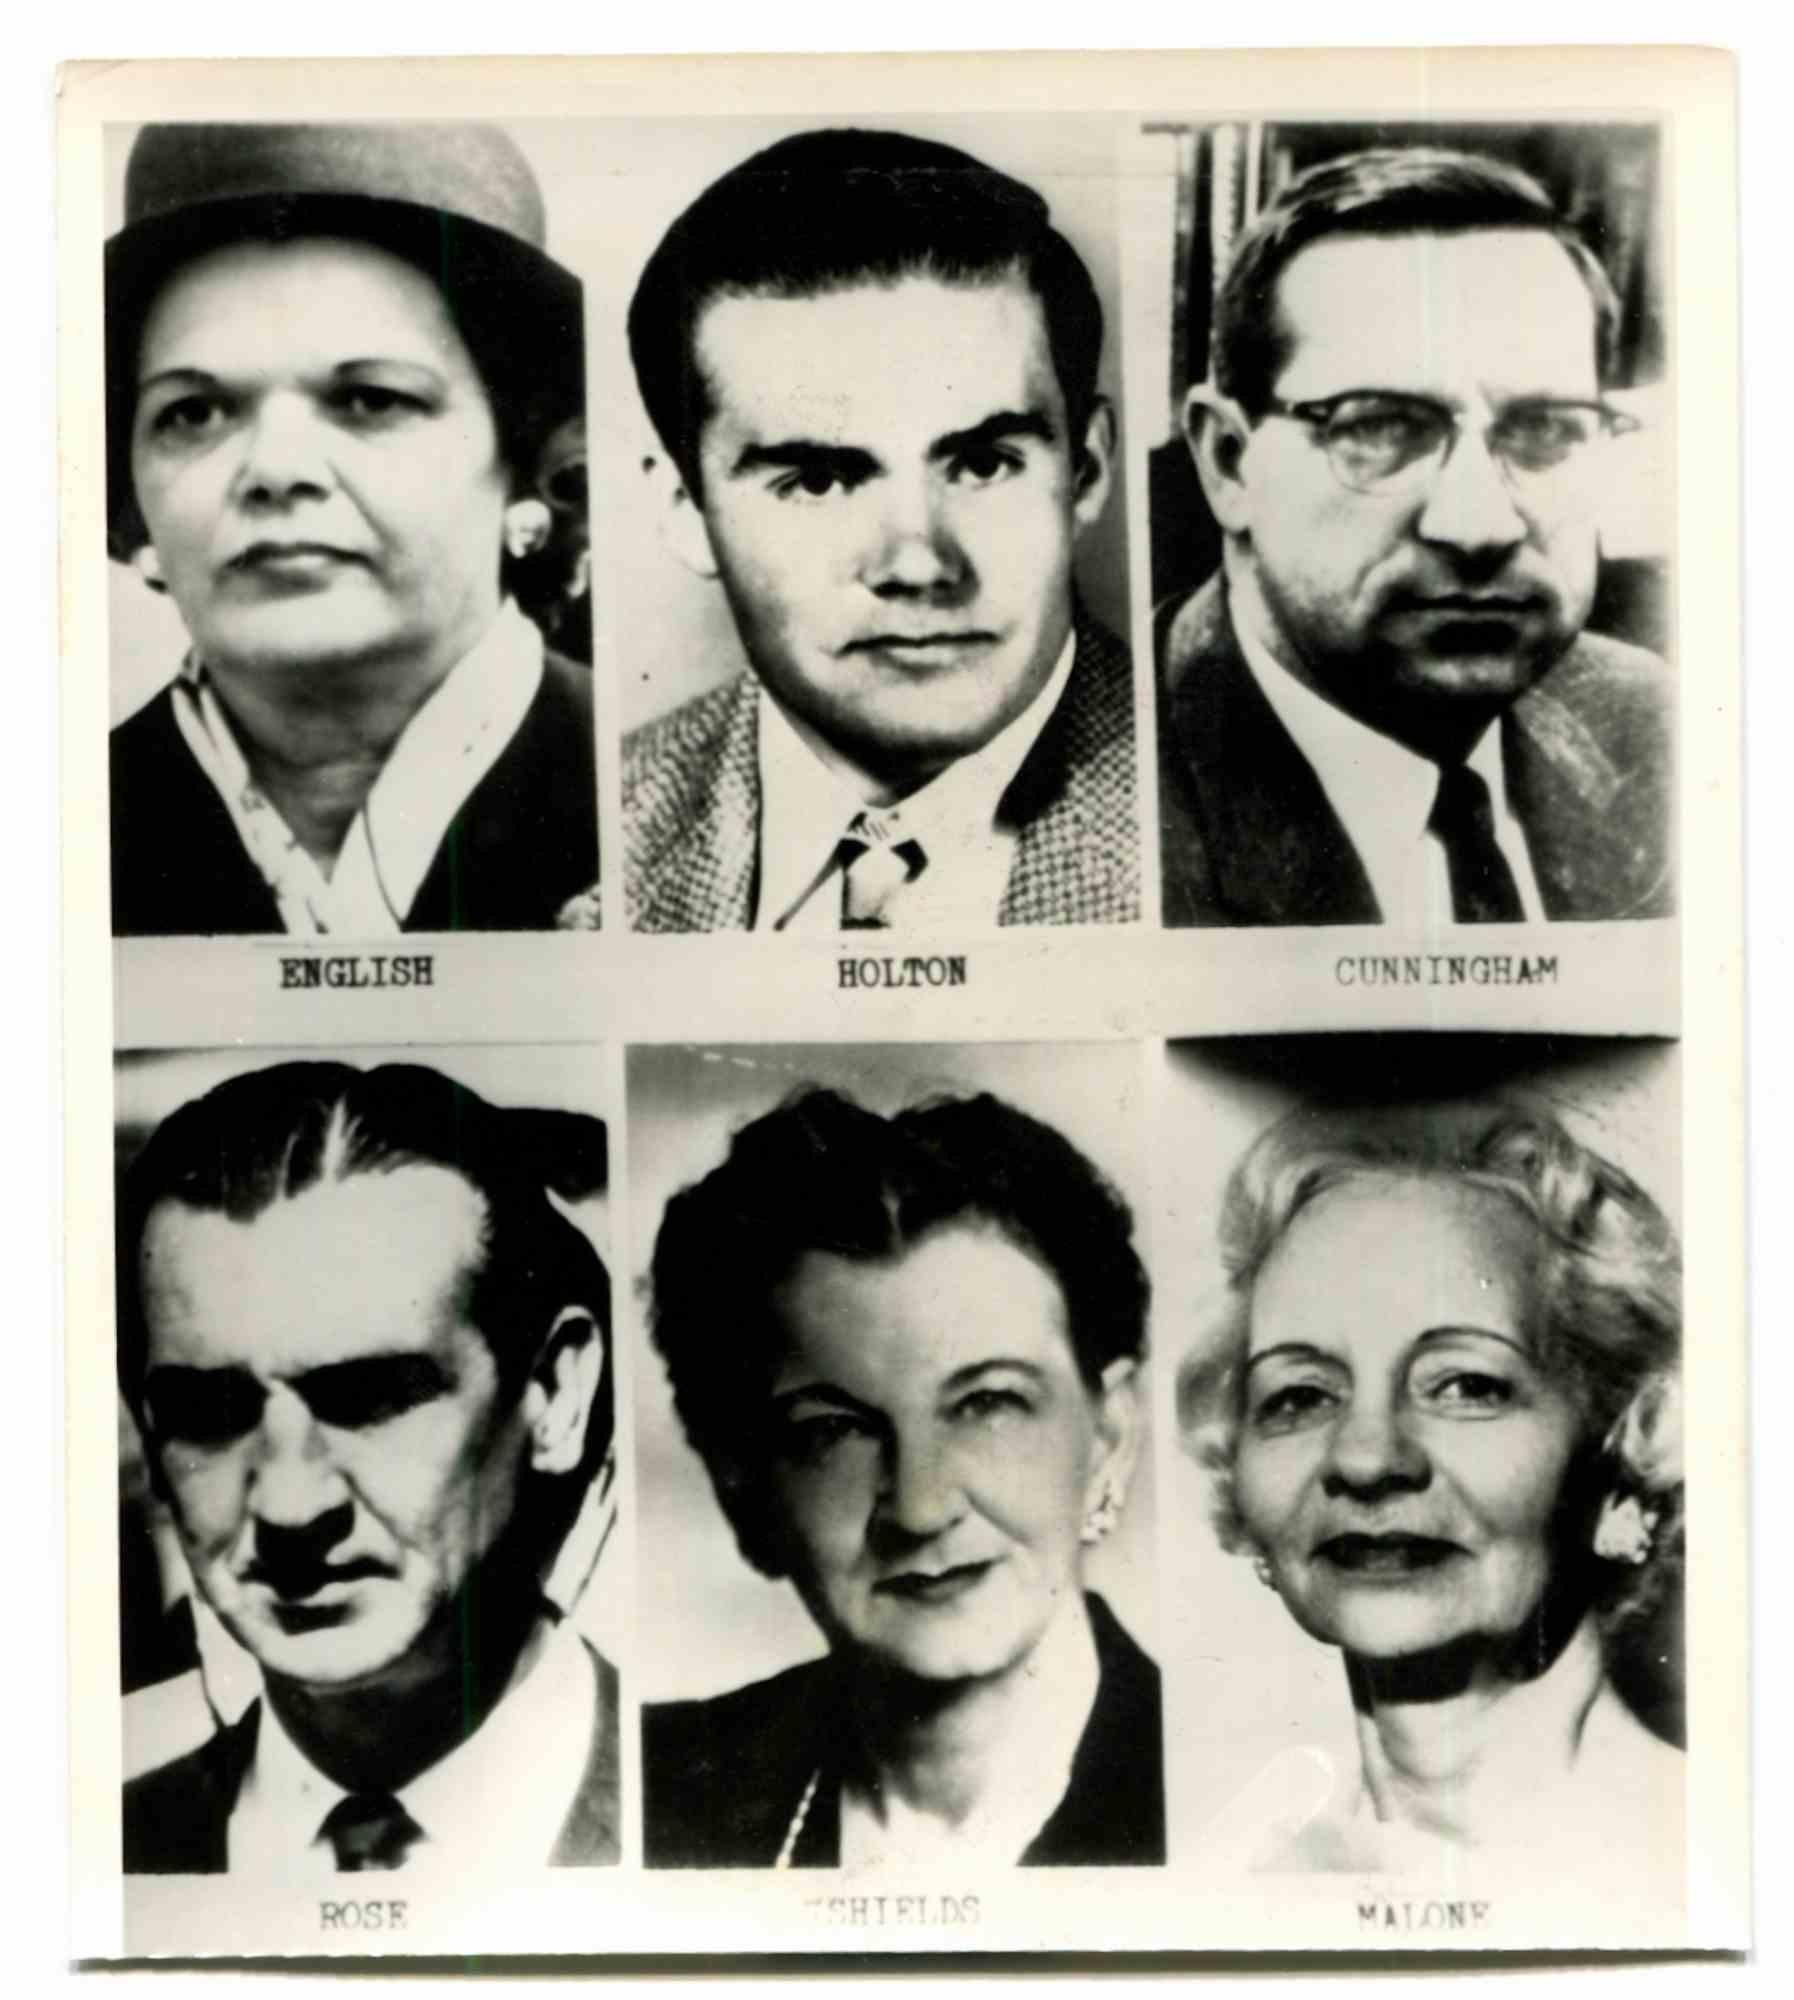 Unknown Figurative Photograph - Portraits of the Jurors in the Ruby Trial - Historical Vintage Photo - 1960s